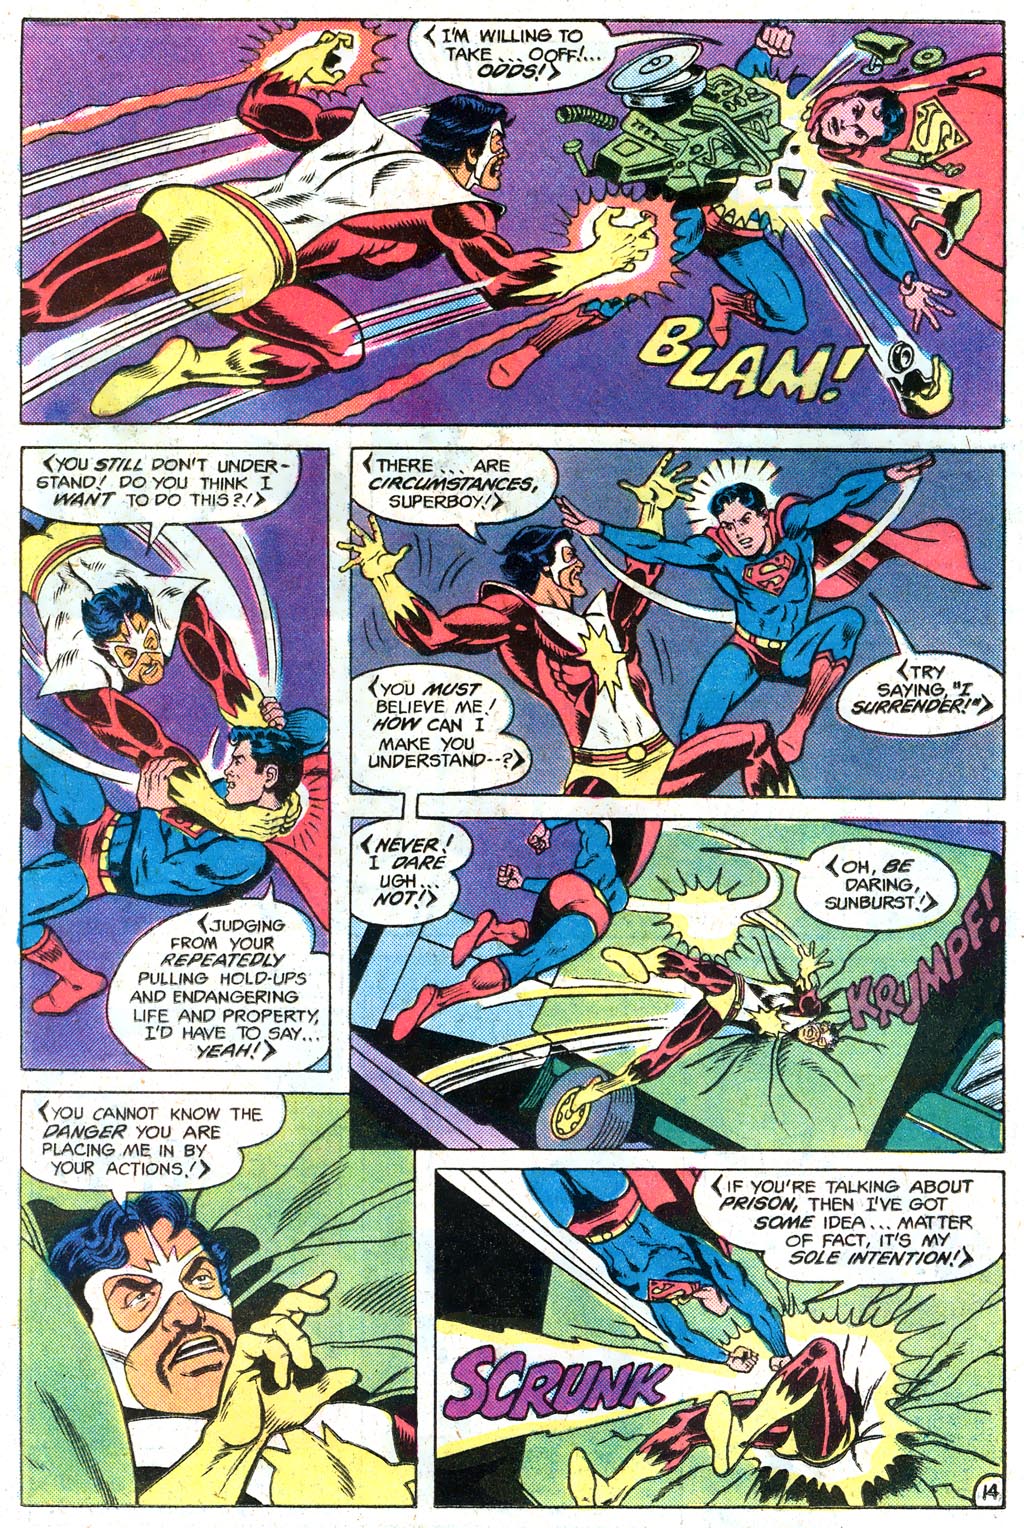 The New Adventures of Superboy 46 Page 18